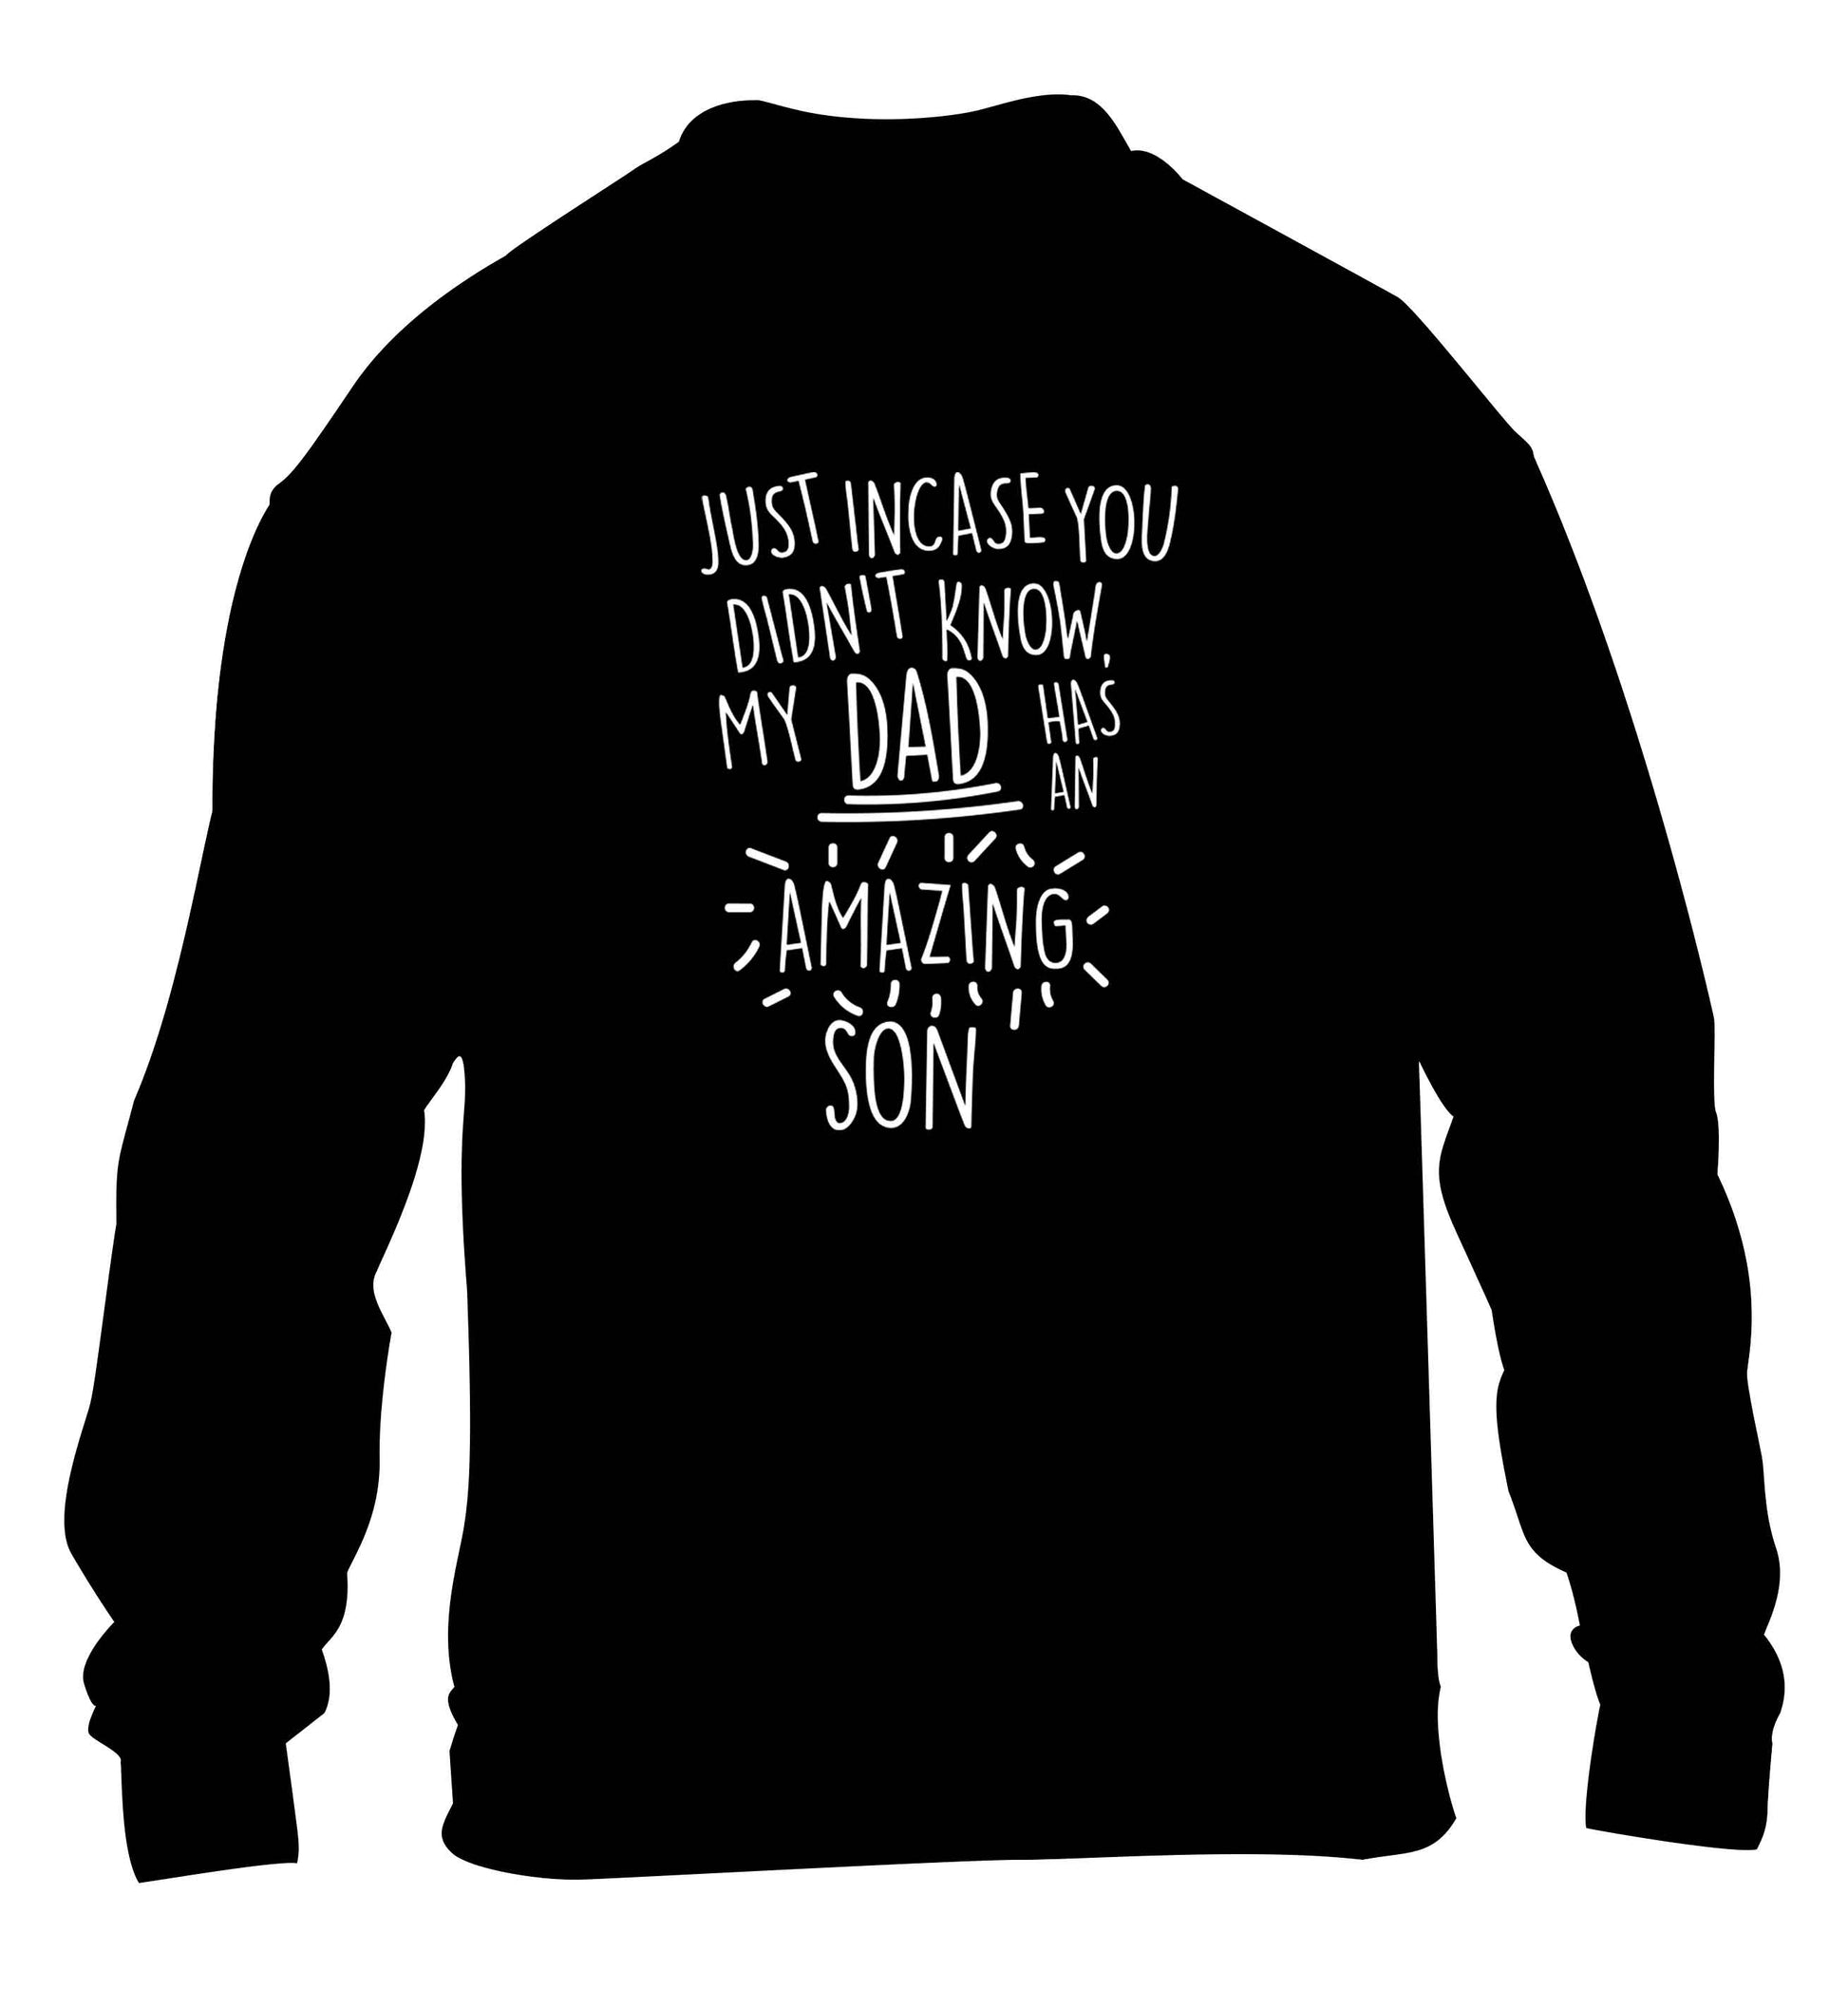 Just incase you didn't know my dad has an amazing son children's black sweater 12-13 Years